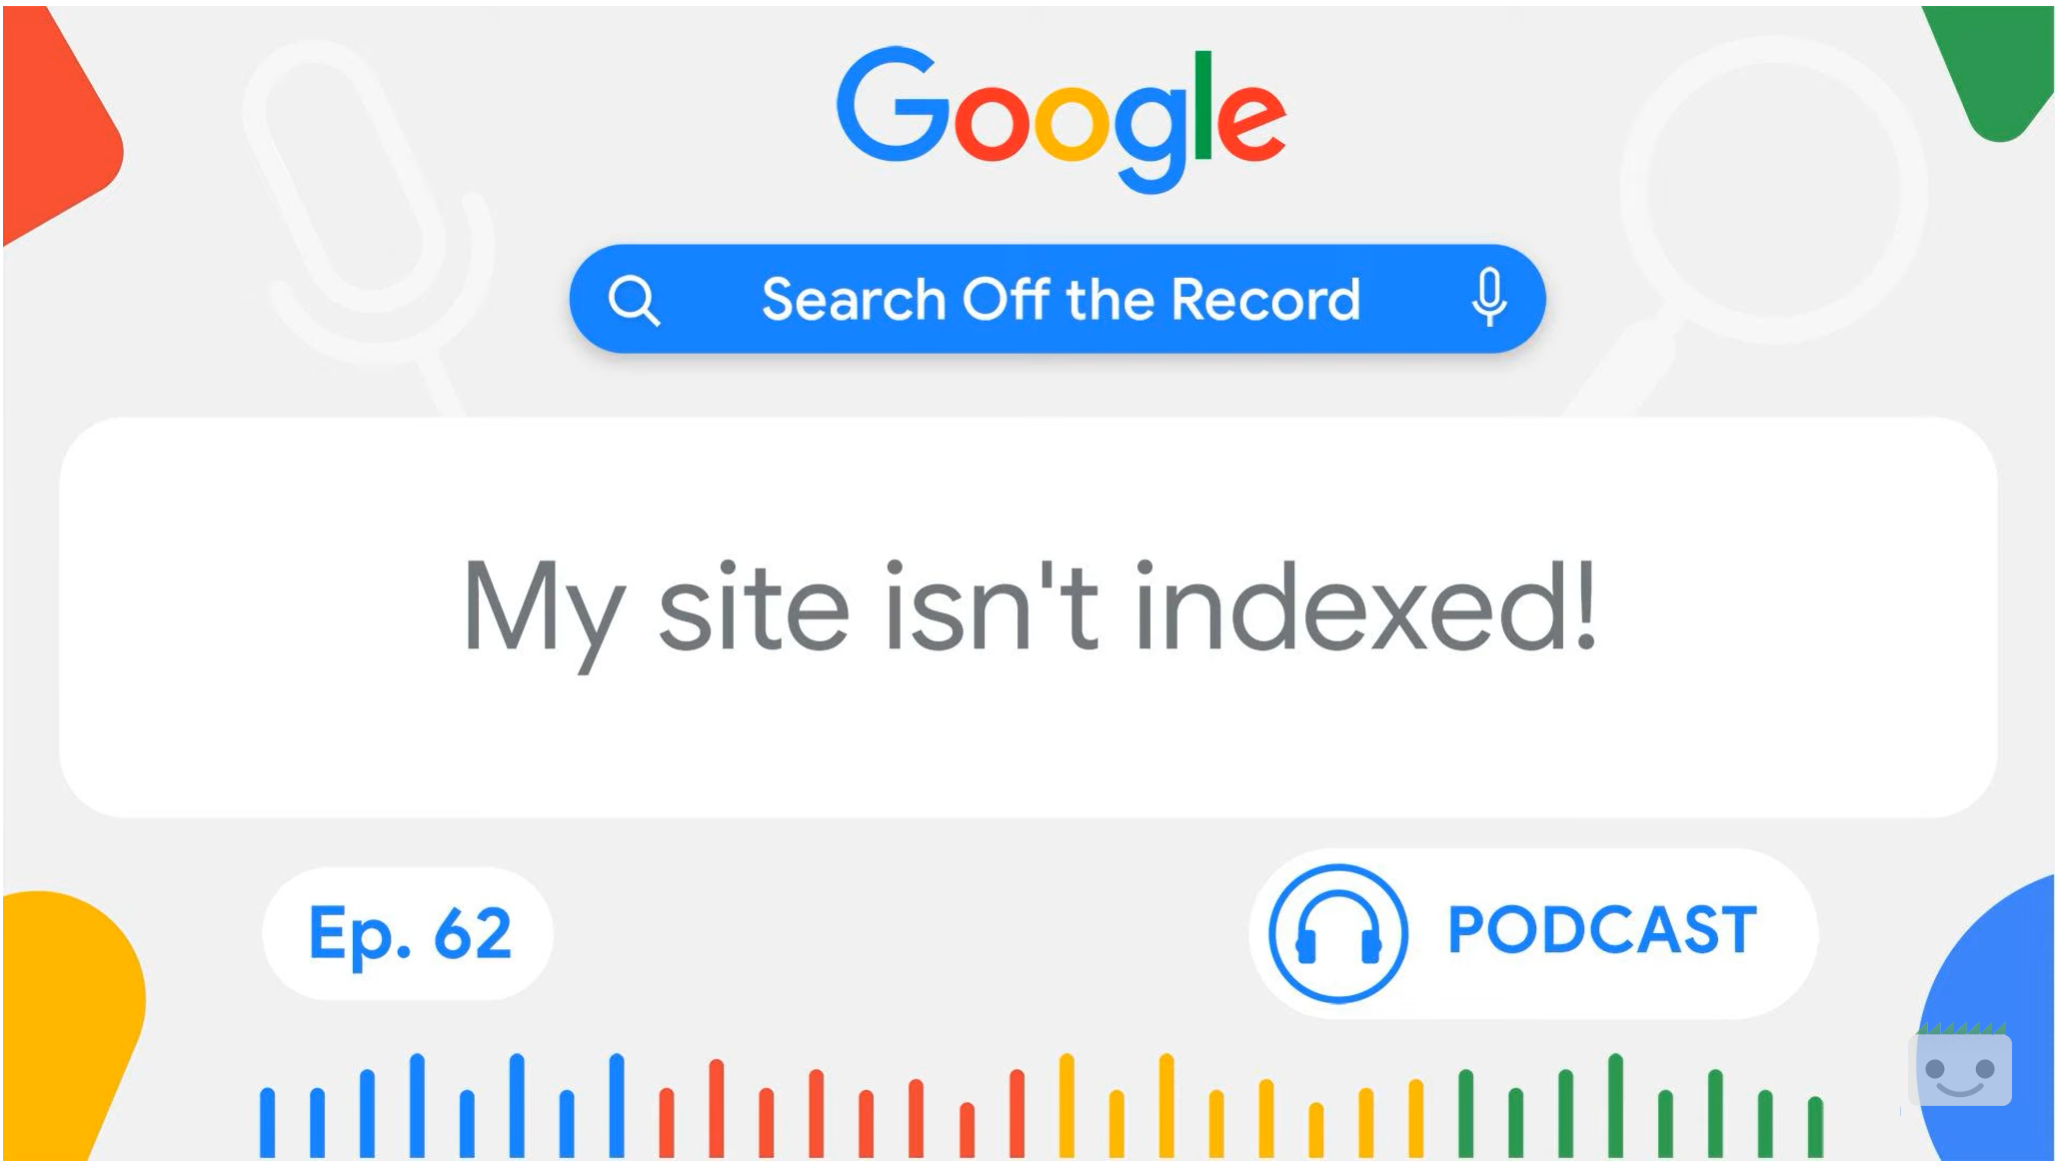 My site isn't indexed - Google Search off the Record